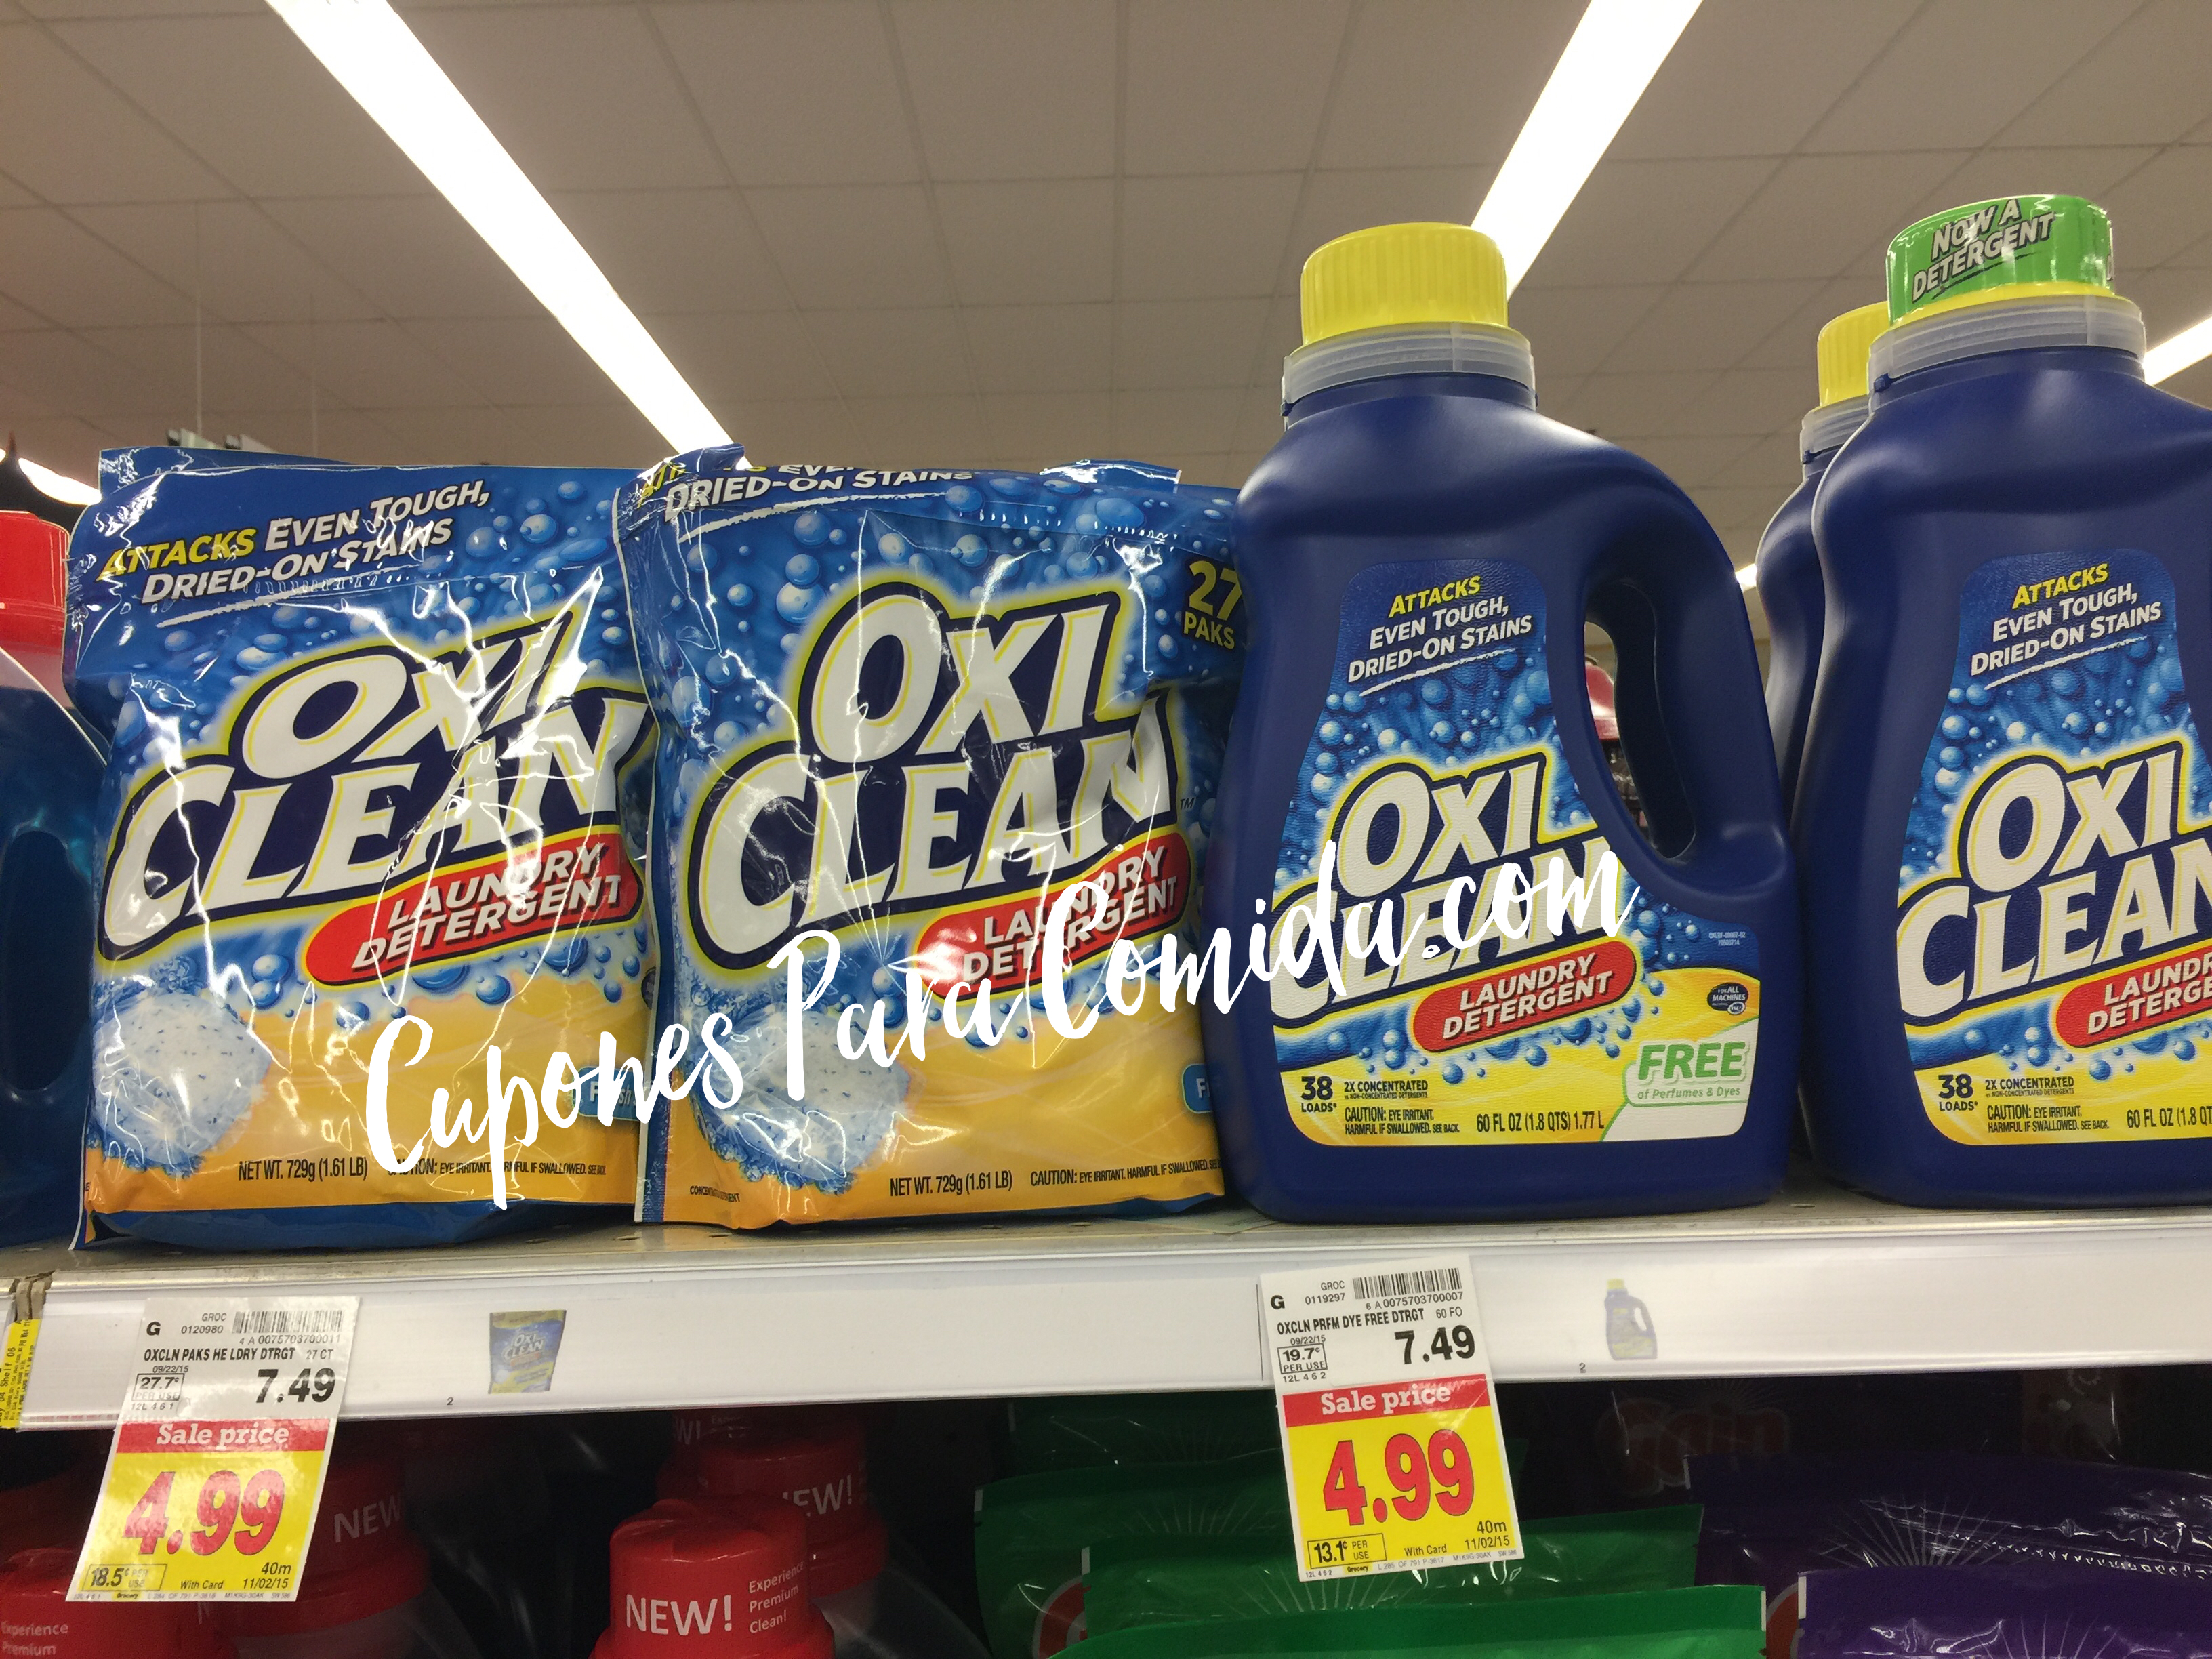 Oxiclean 10/21/15